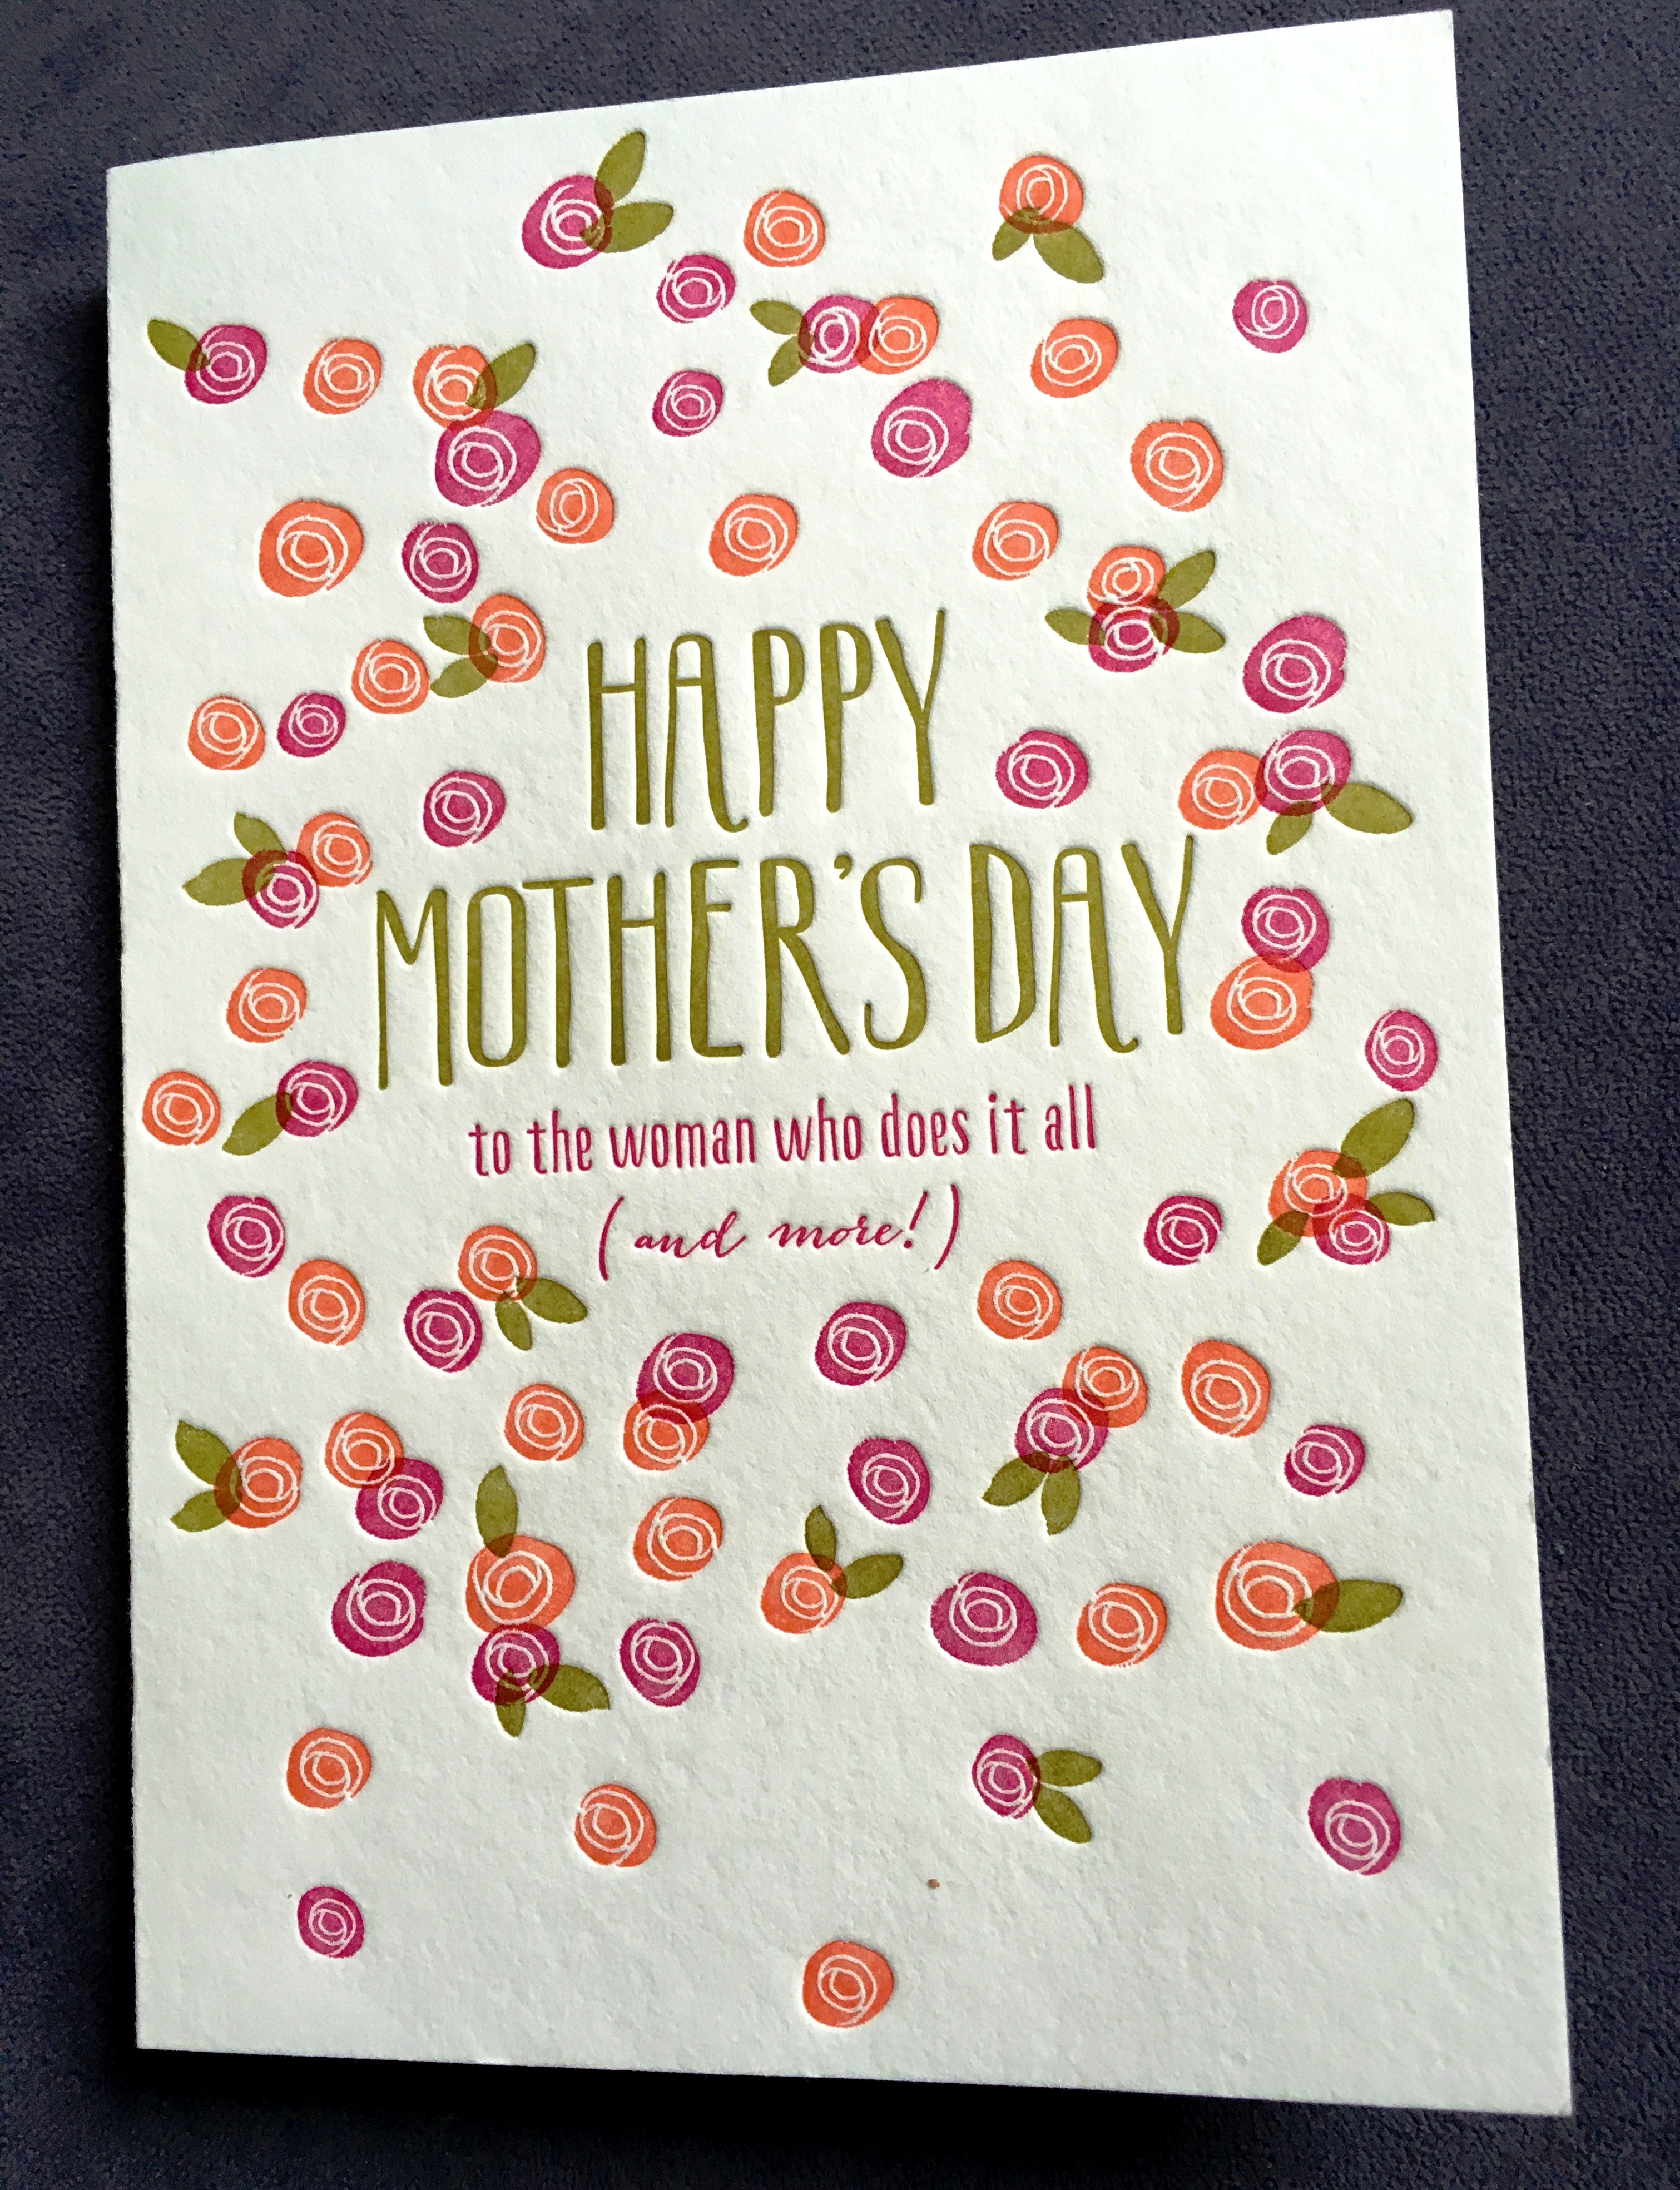 Mother's Day card from Allegra and JP.jpg